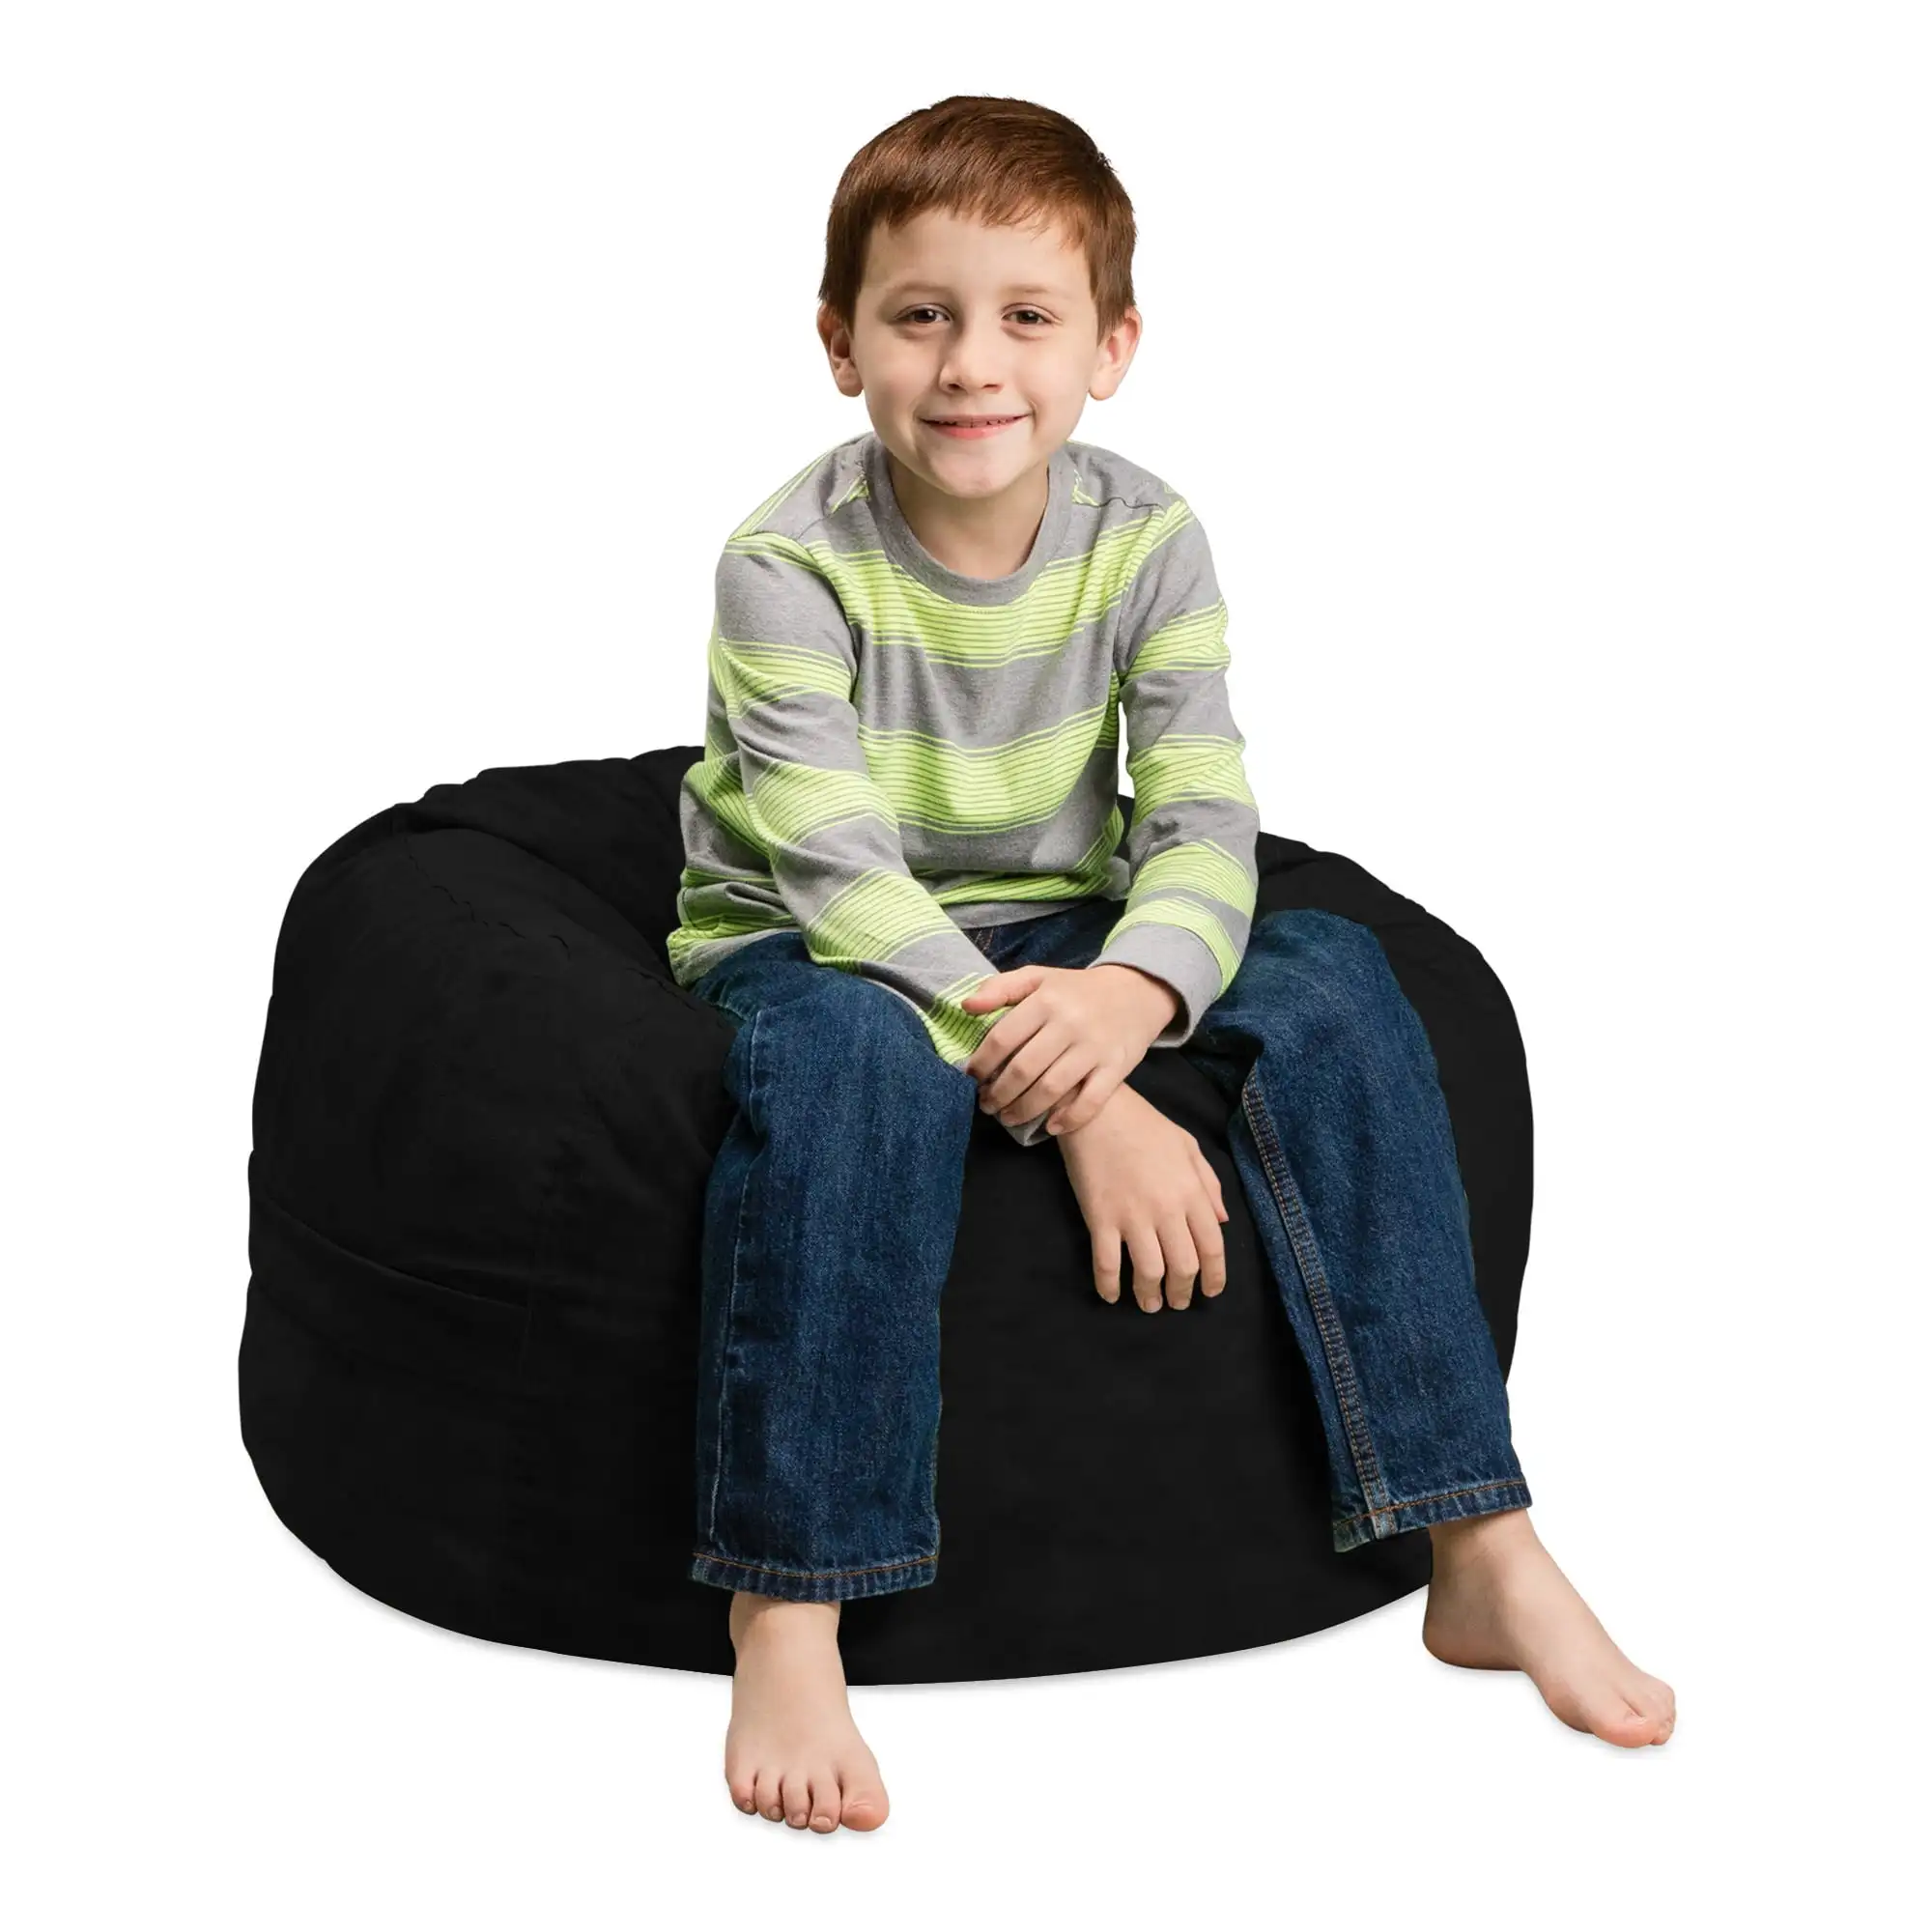 

Memory Foam Bean Bag Chair, Lounger Round Fluffy Couch Cozy BeanBag Chairs with Microsuede Cover, Kids, 2 ft, Black